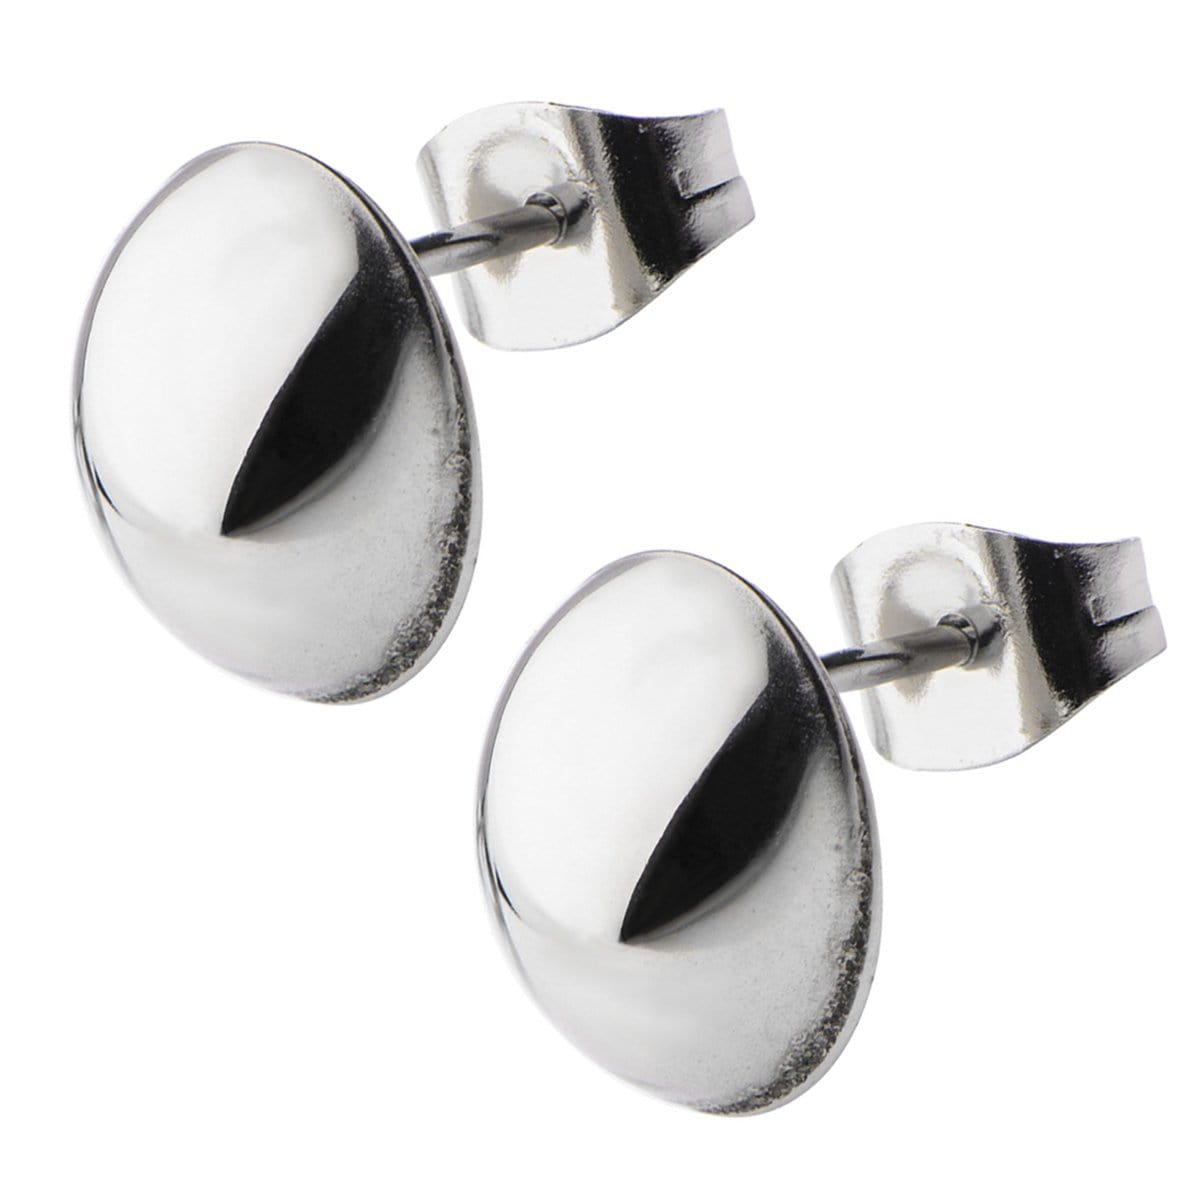 INOX JEWELRY Earrings Silver Tone Stainless Steel Small Oval Dome Studs SSE4808